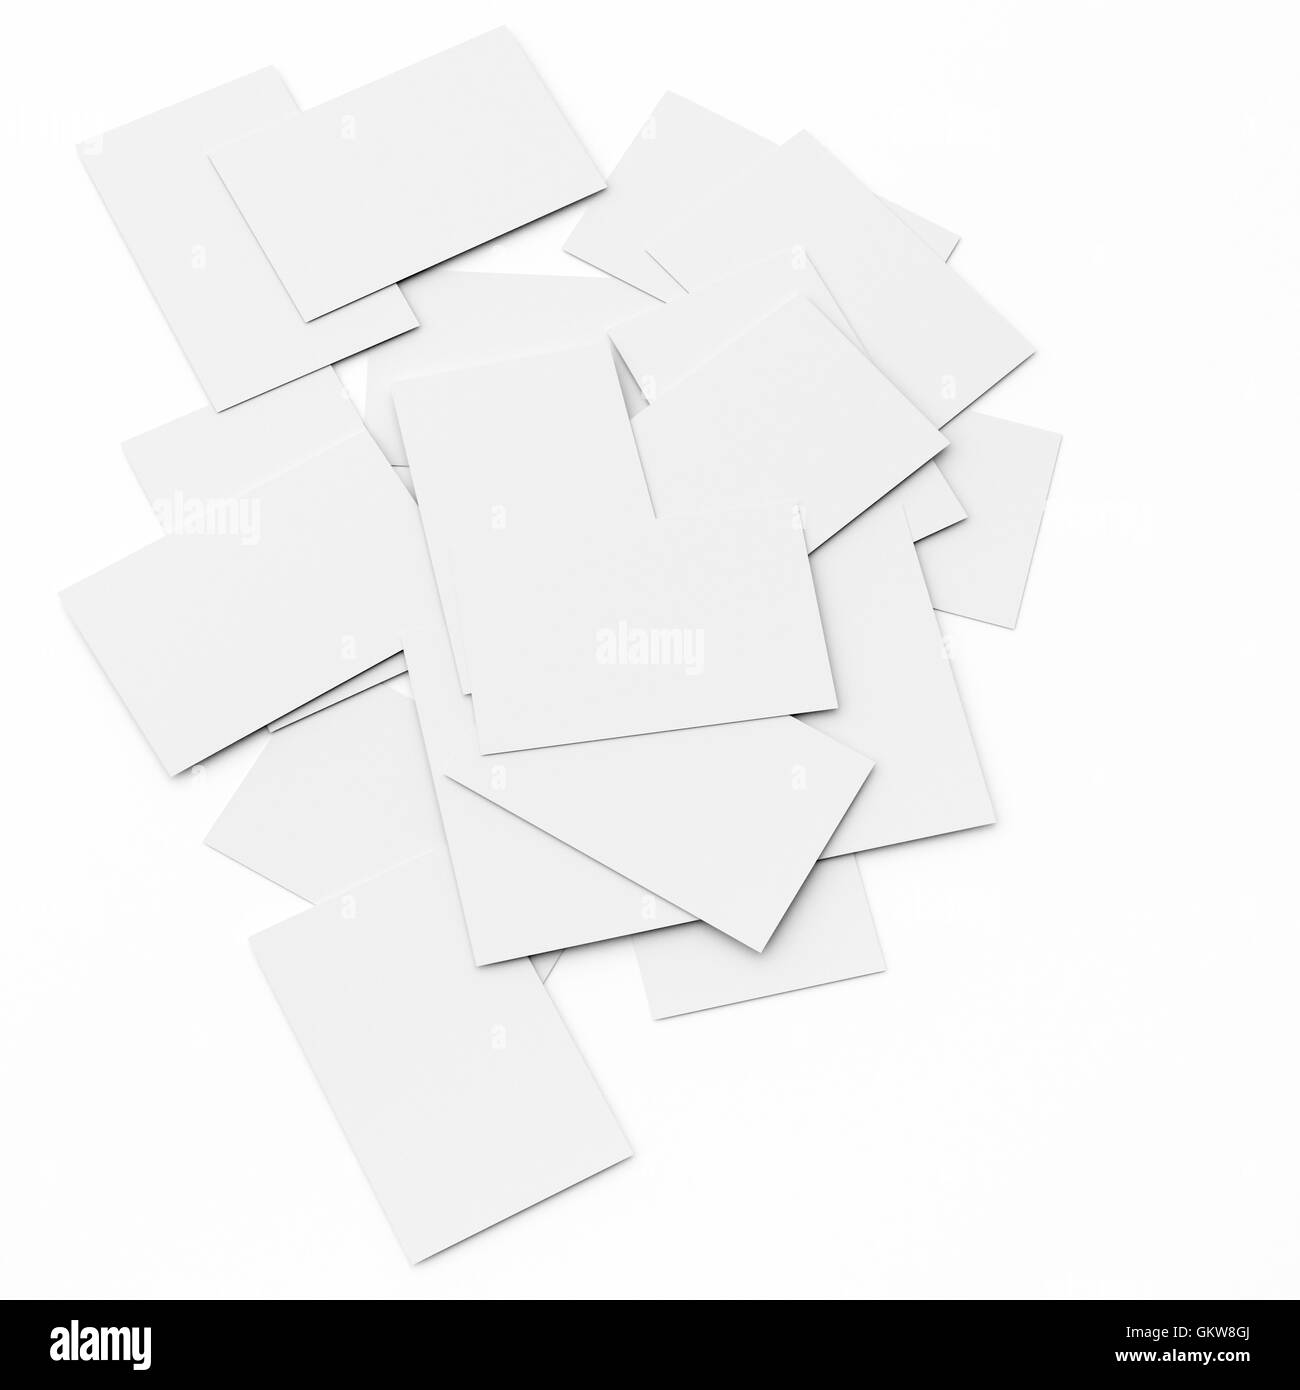 business card concepts Stock Photo